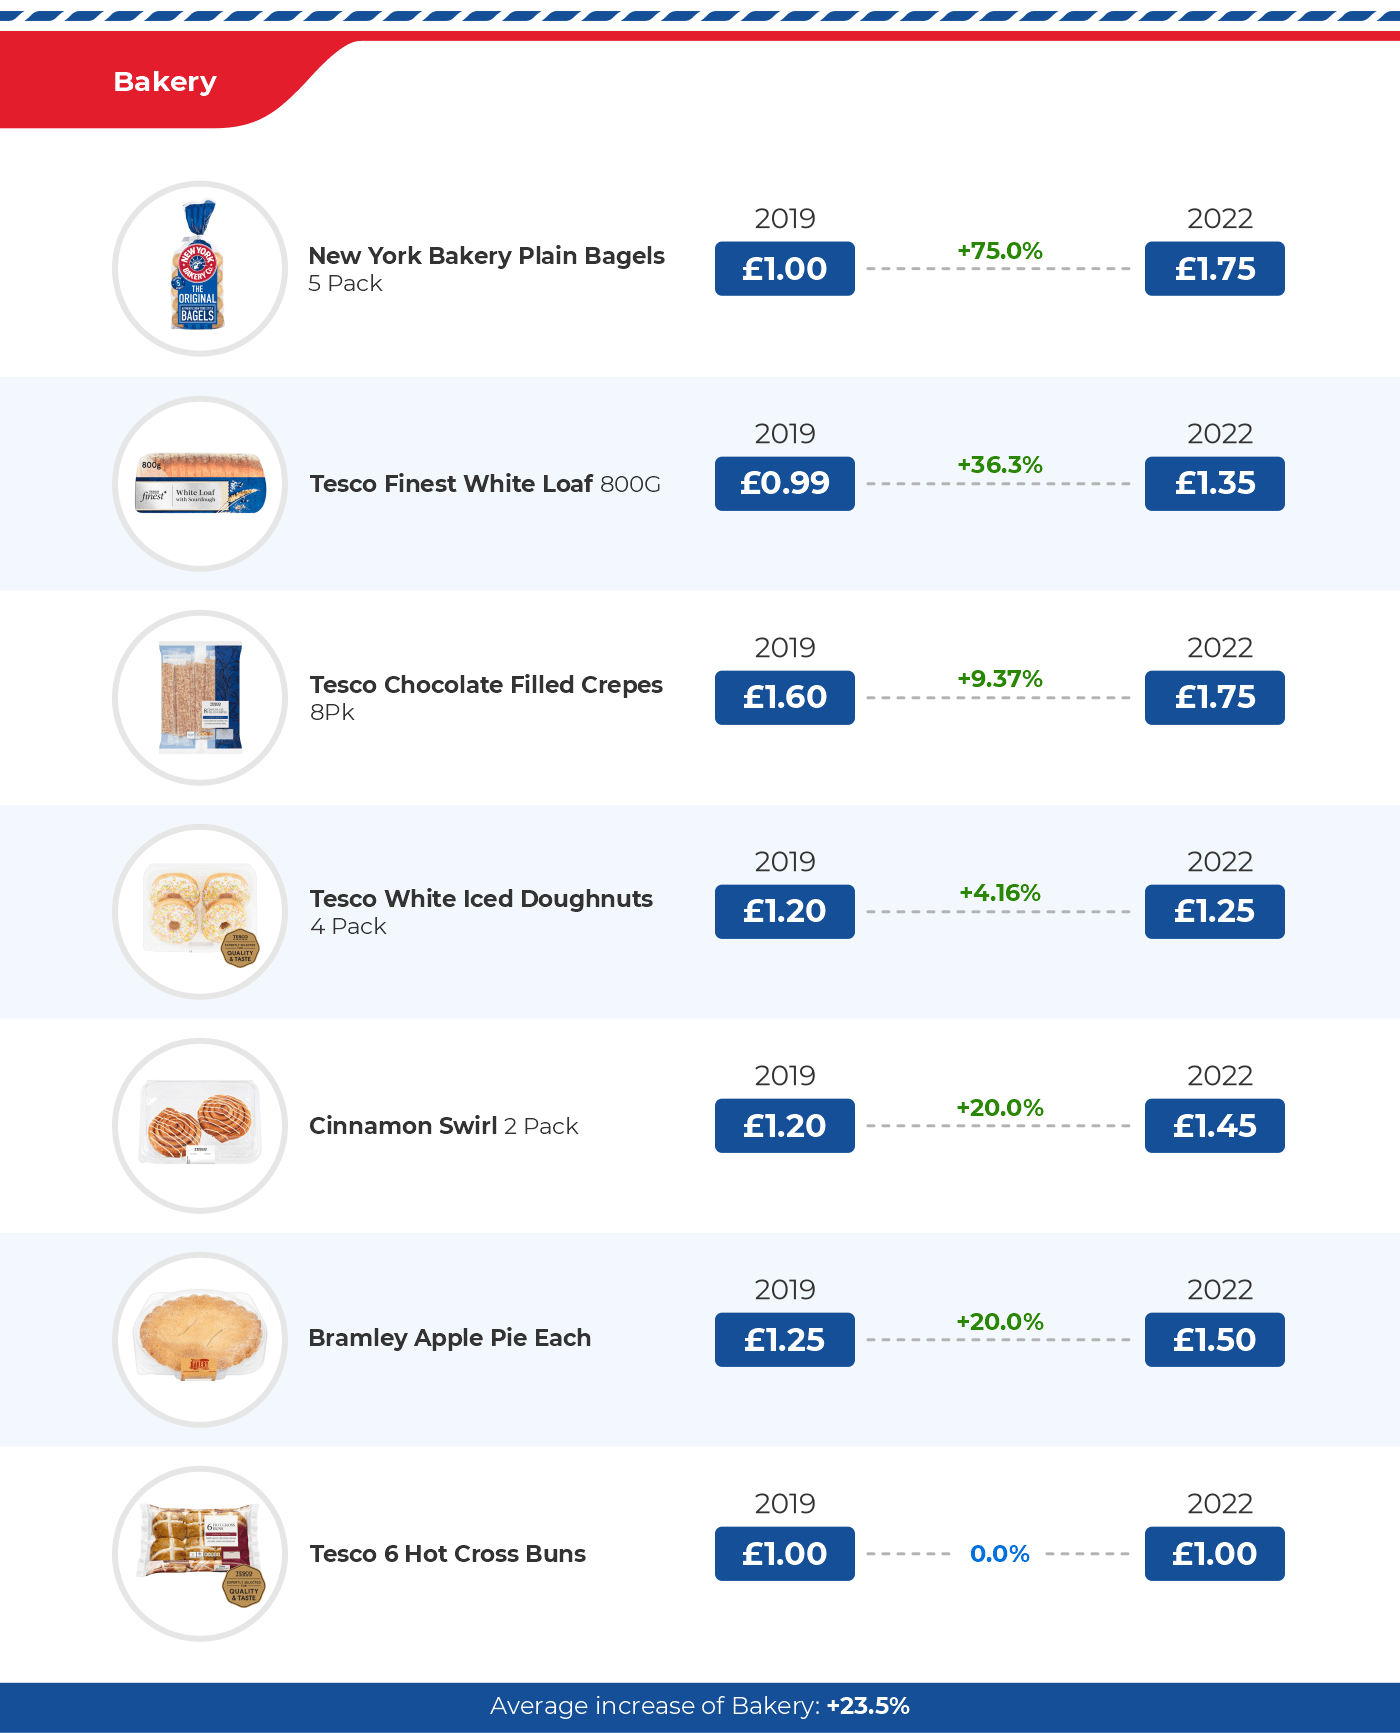 Tesco Grocery Prices Increased by 22.6% Between August 2019 and August 2022